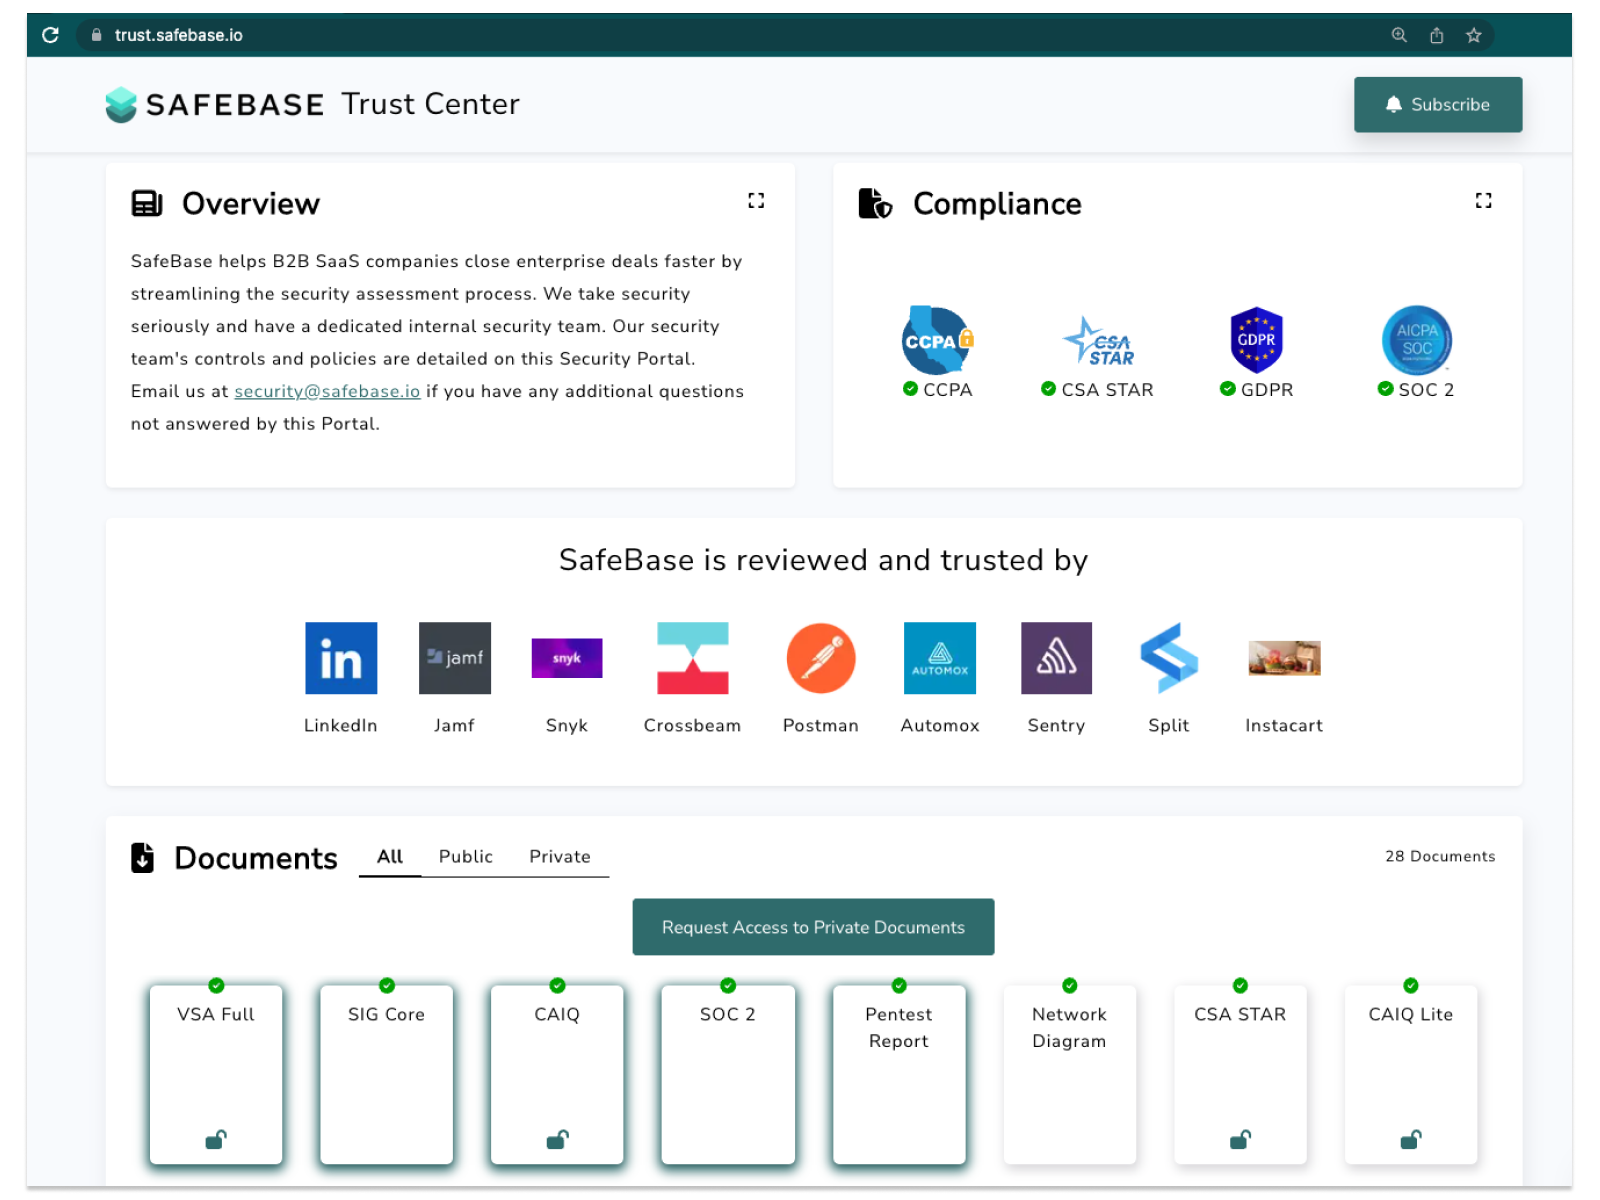 The SafeBase Smart Trust Center provides an organized, easy-to-navigate home for all of your customer-critical security documentation and information.